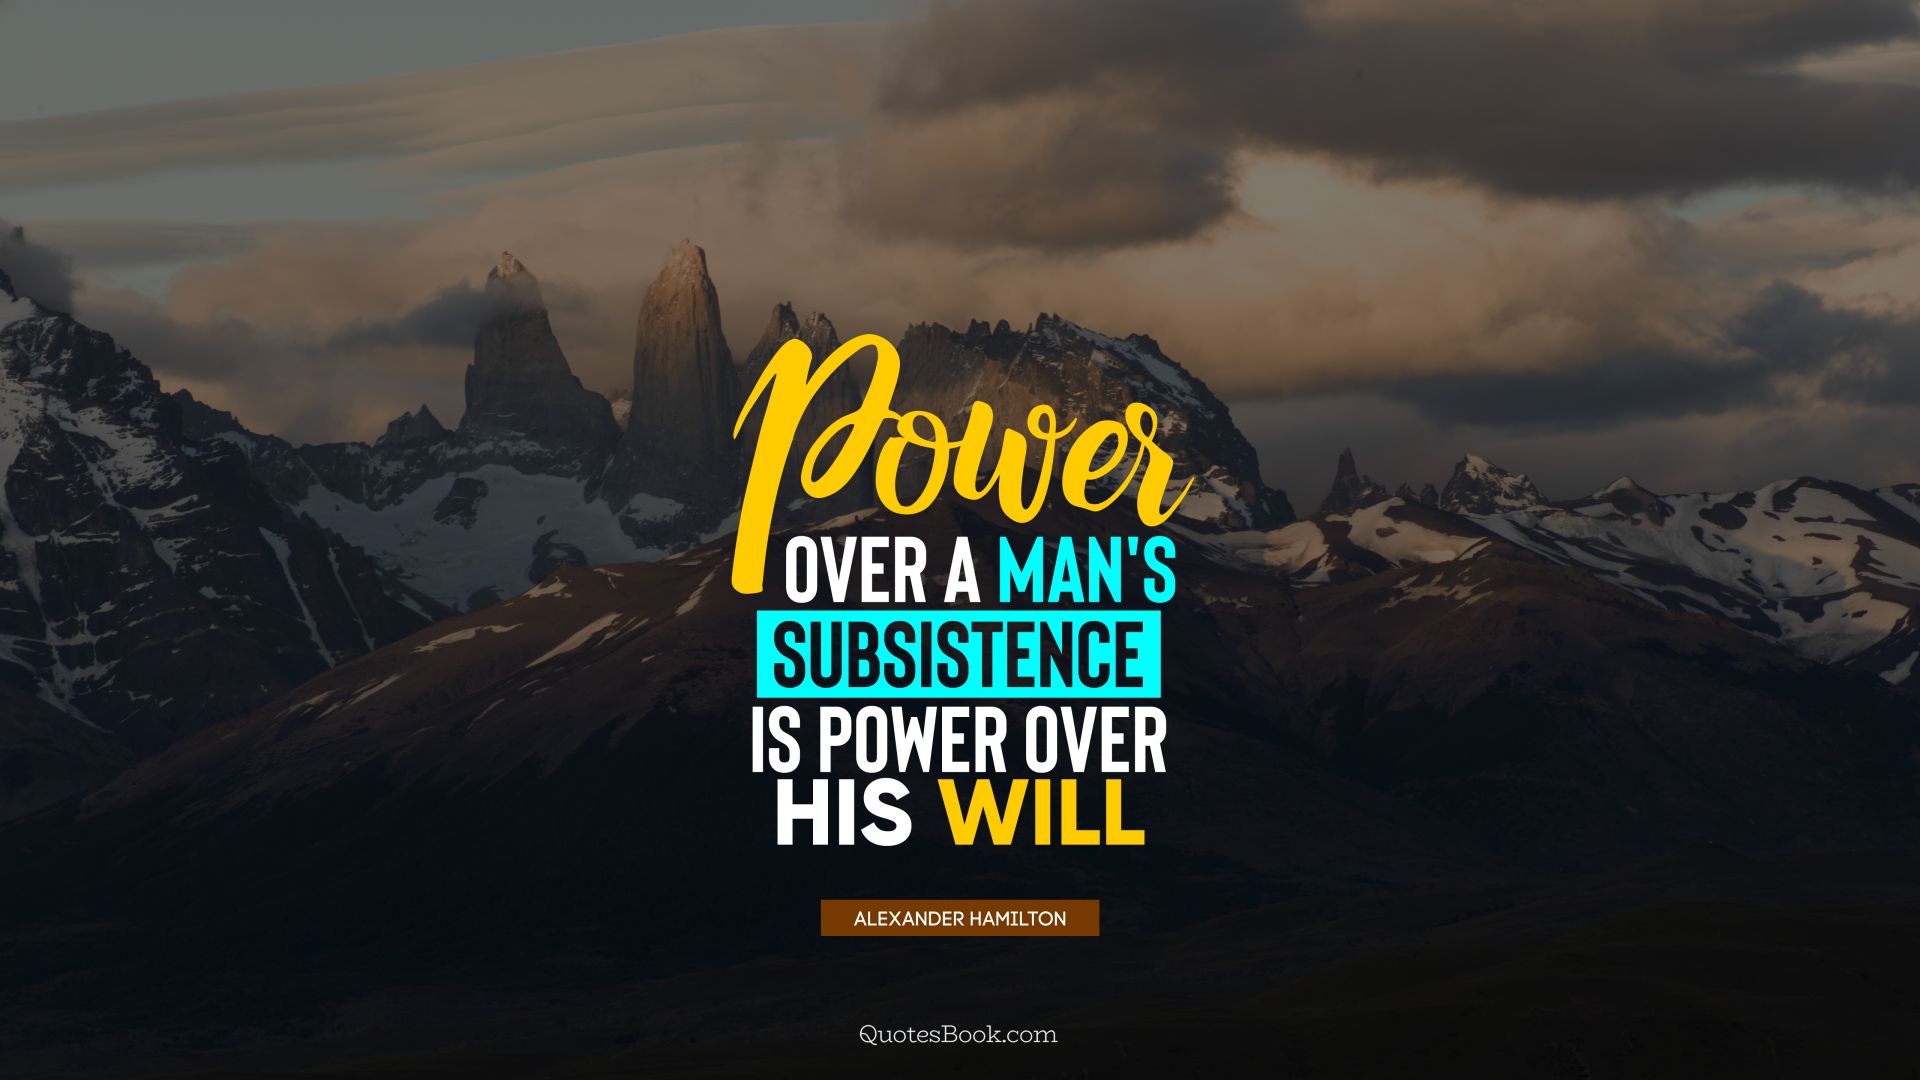 Power over a man's subsistence is power over his will. - Quote by Alexander Hamilton